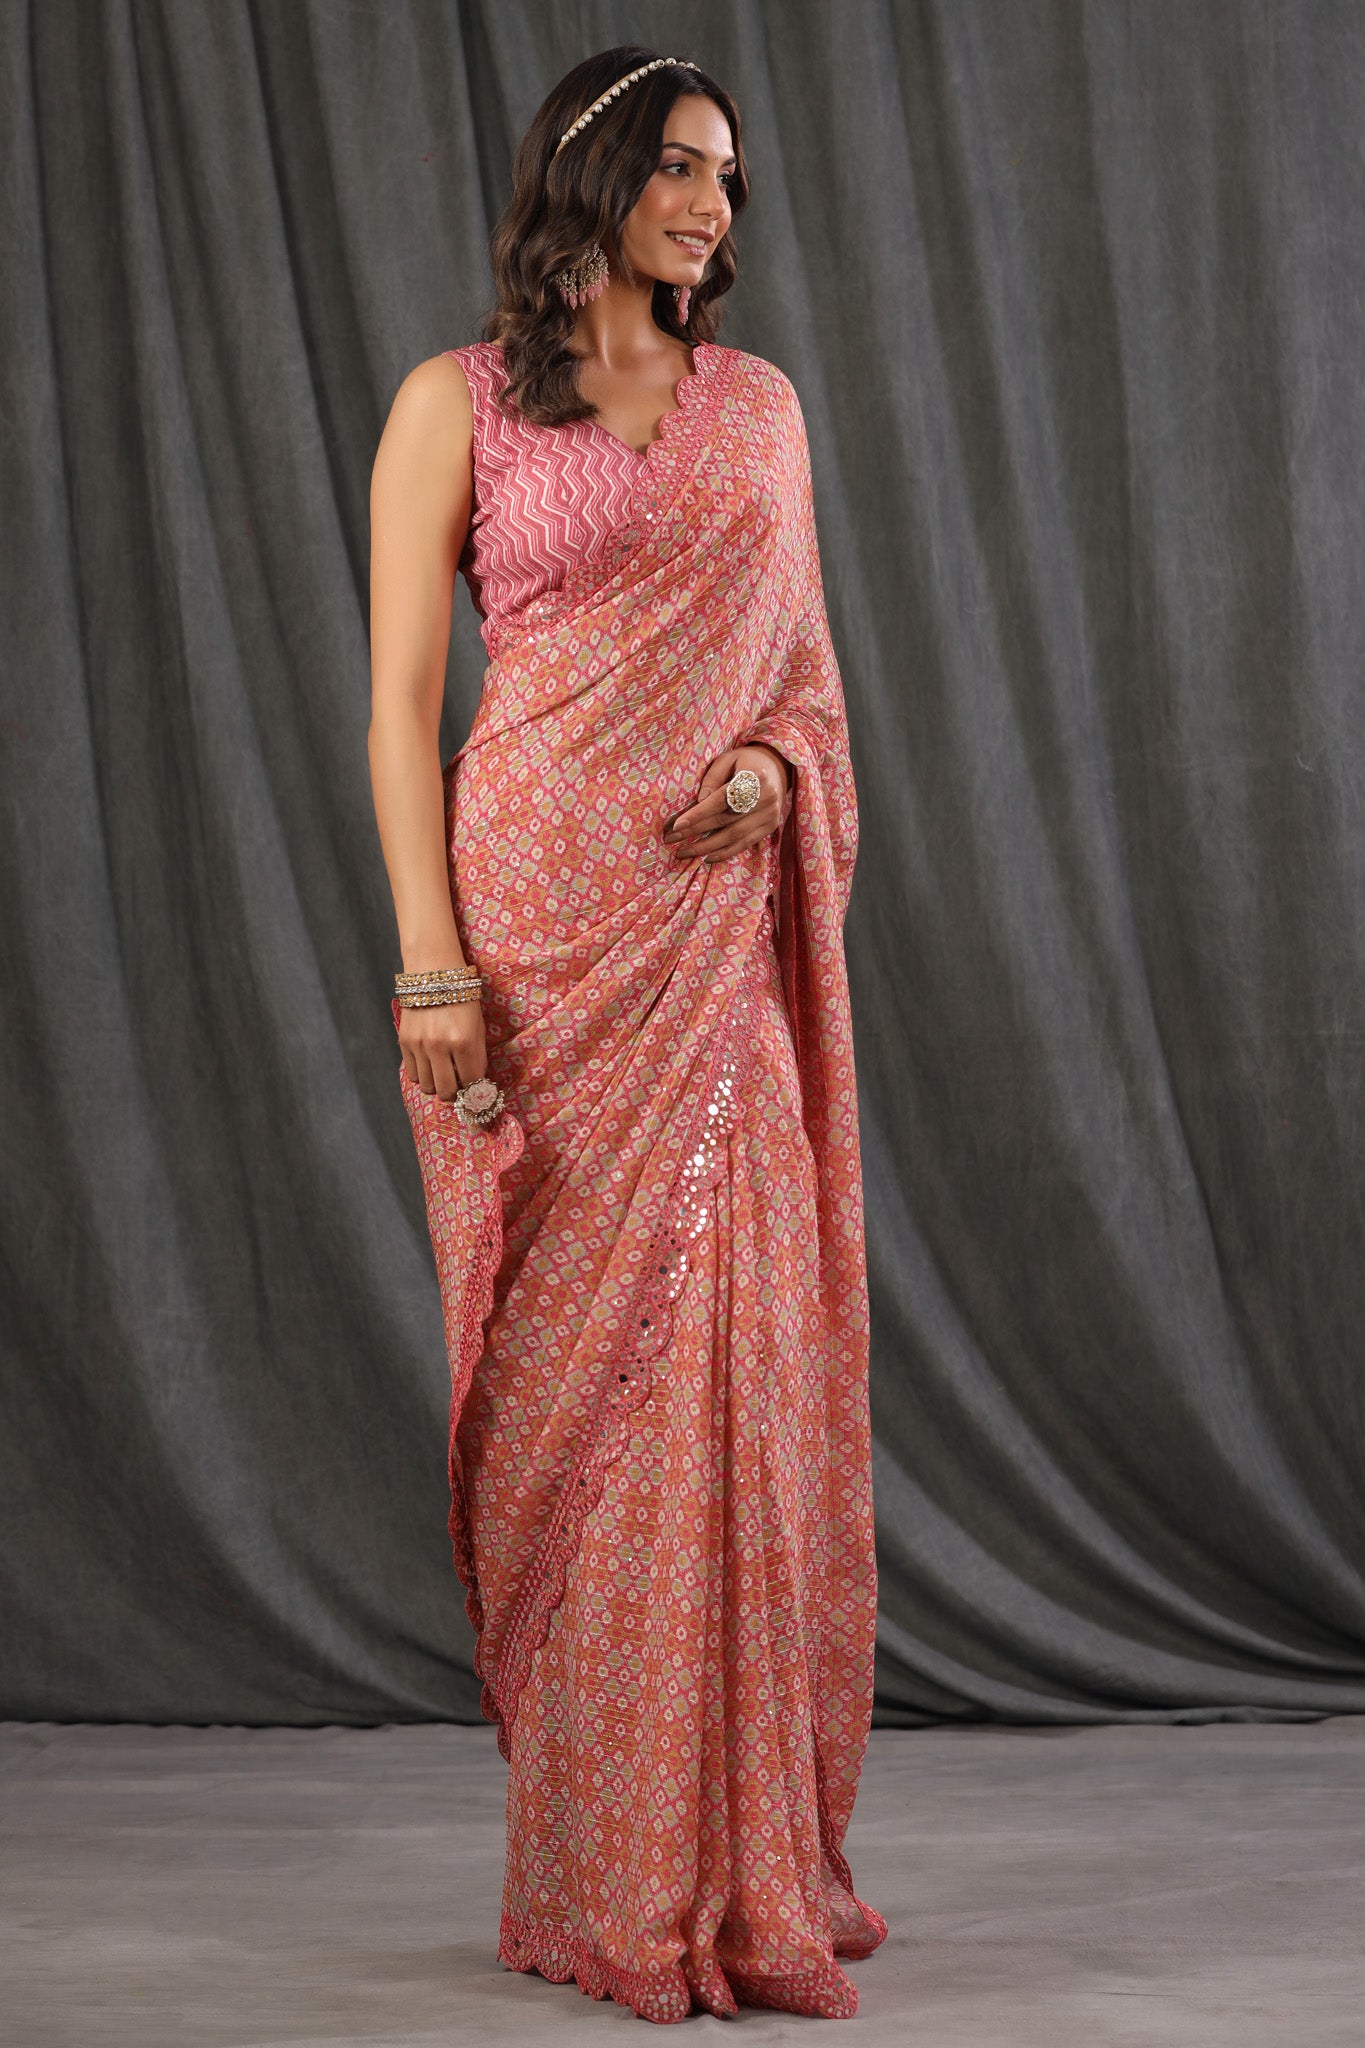 Buy pink printed crepe georgette saree online in USA with scalloped border. Make a fashion statement at weddings with stunning designer sarees, embroidered sarees with blouse, wedding sarees, handloom sarees from Pure Elegance Indian fashion store in USA.-side